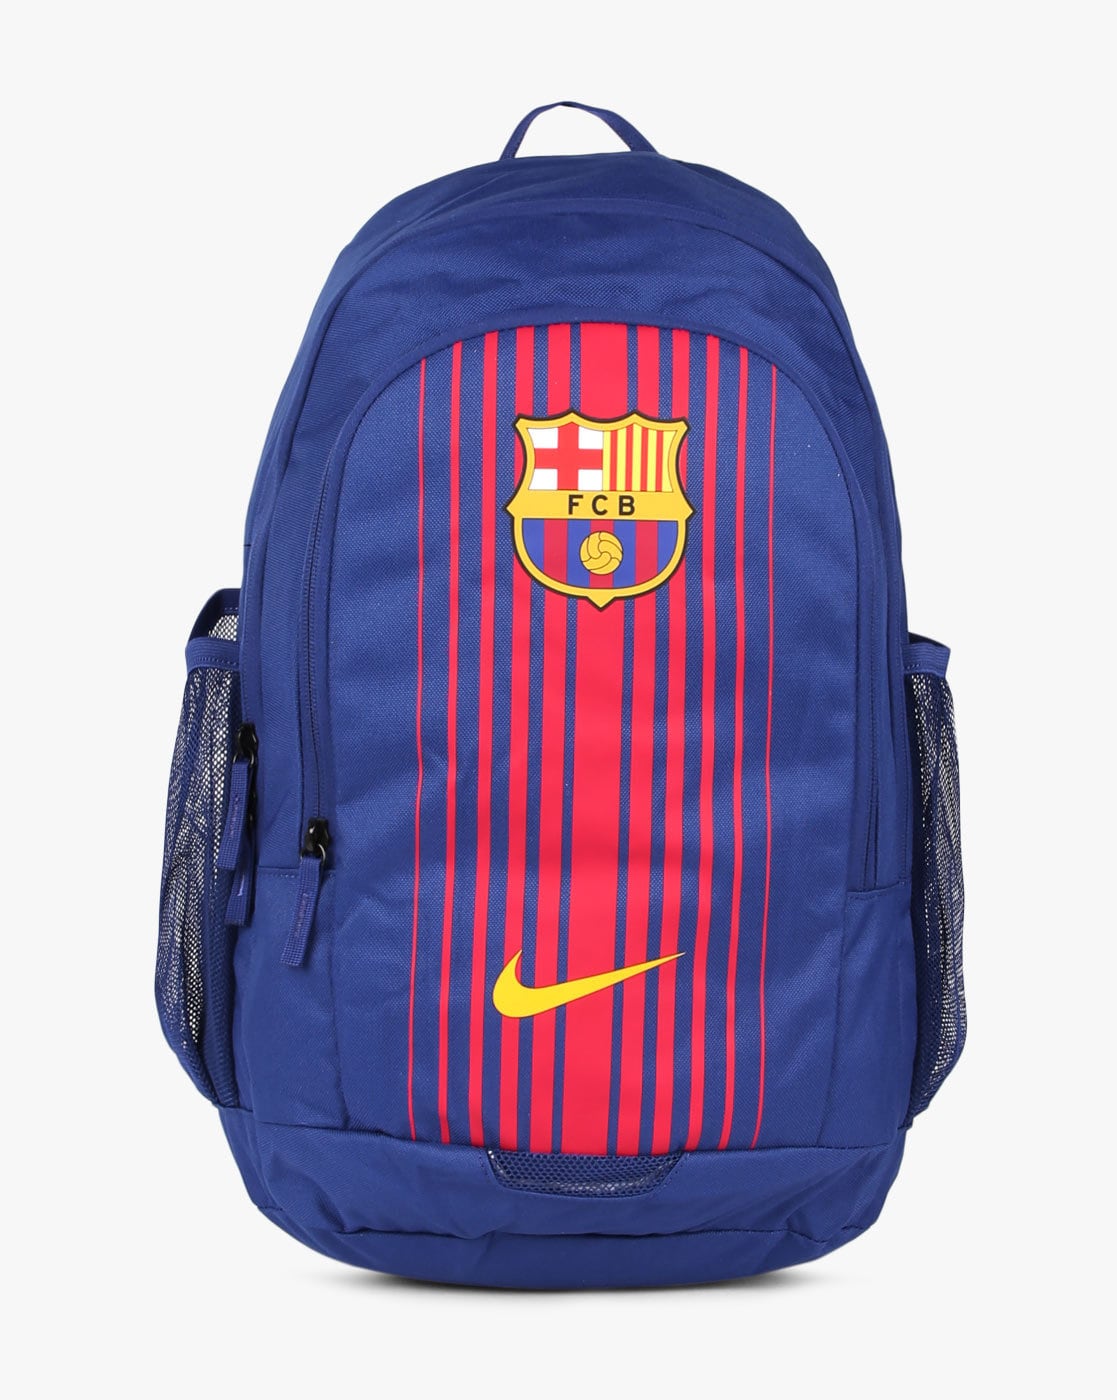 Icon Sports Officially Licensed FC Barcelona Soccer Backpack Bag India |  Ubuy